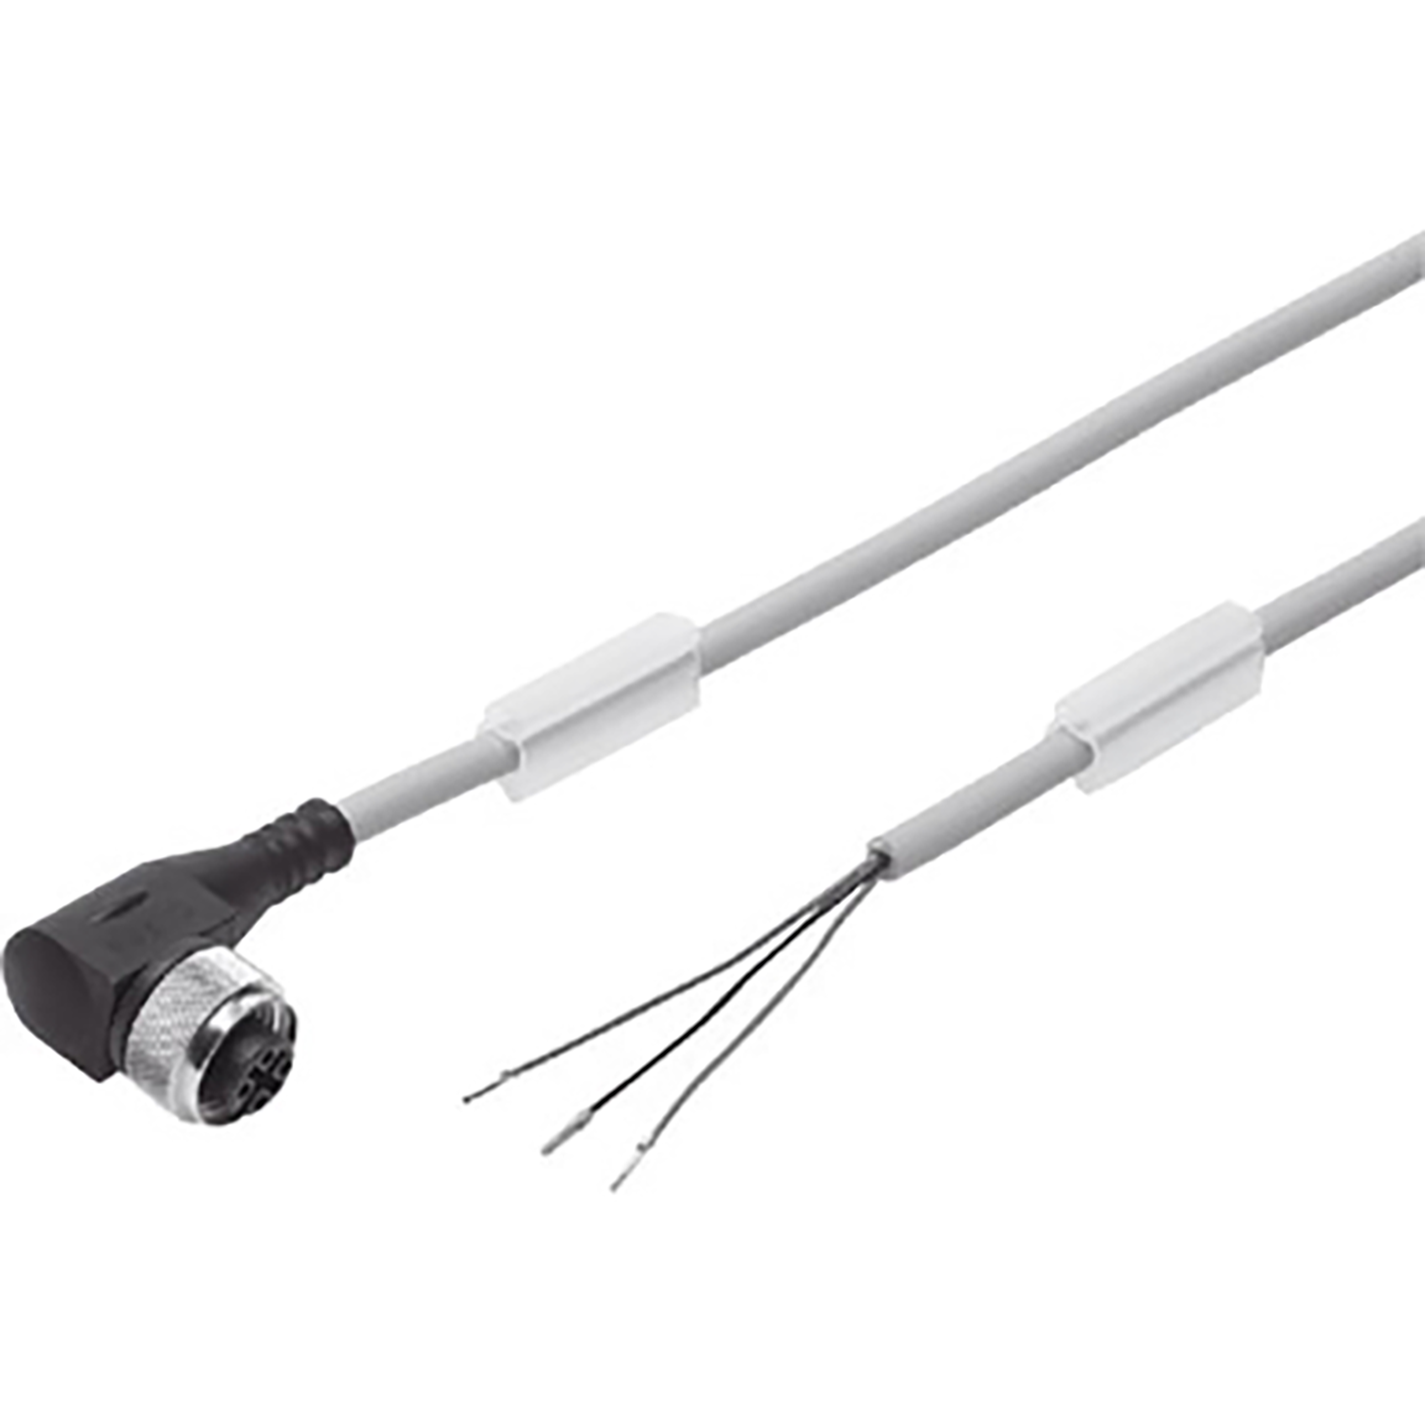 NEBU-M12W5P-K-2.5-LE3 CONNECTING CABLE